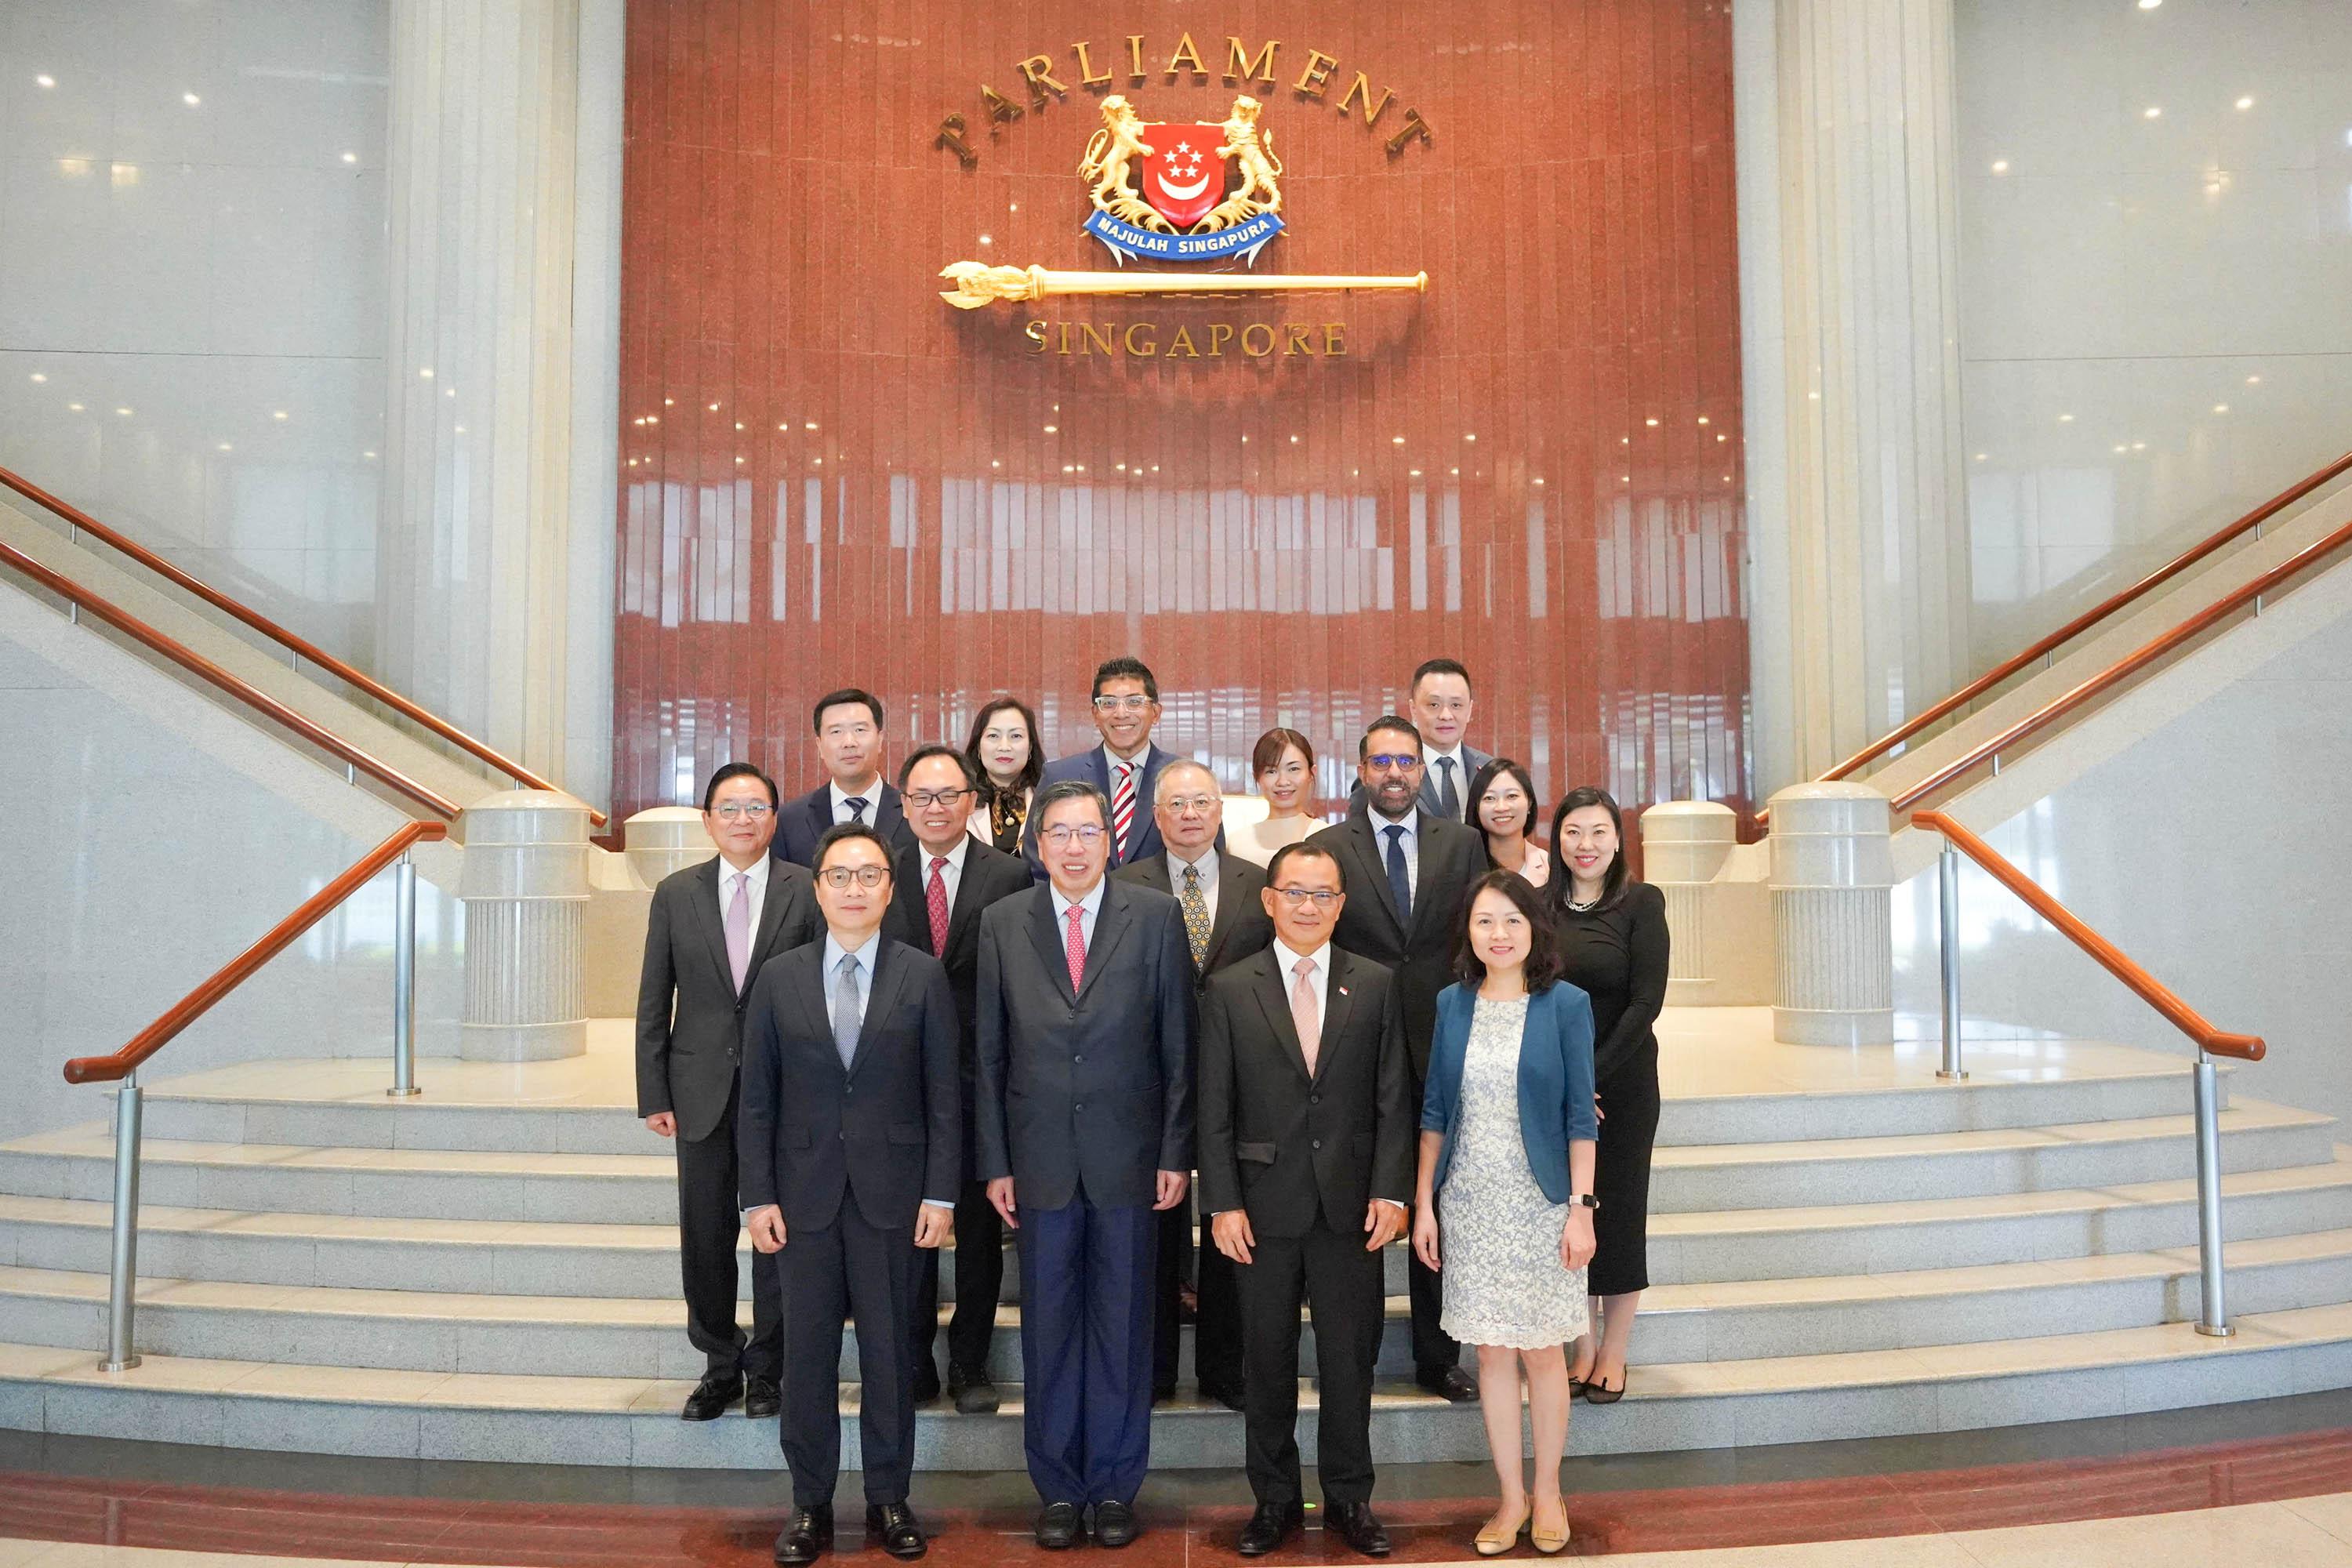 The Legislative Council (LegCo) delegation began its duty visit in Singapore today (May 17). Photo shows the LegCo President, Mr Andrew Leung (front row, second left); members of the delegation; and the Speaker of the Parliament of Singapore, Mr Seah Kian Peng (front row, third left) at the Parliament House of Singapore.